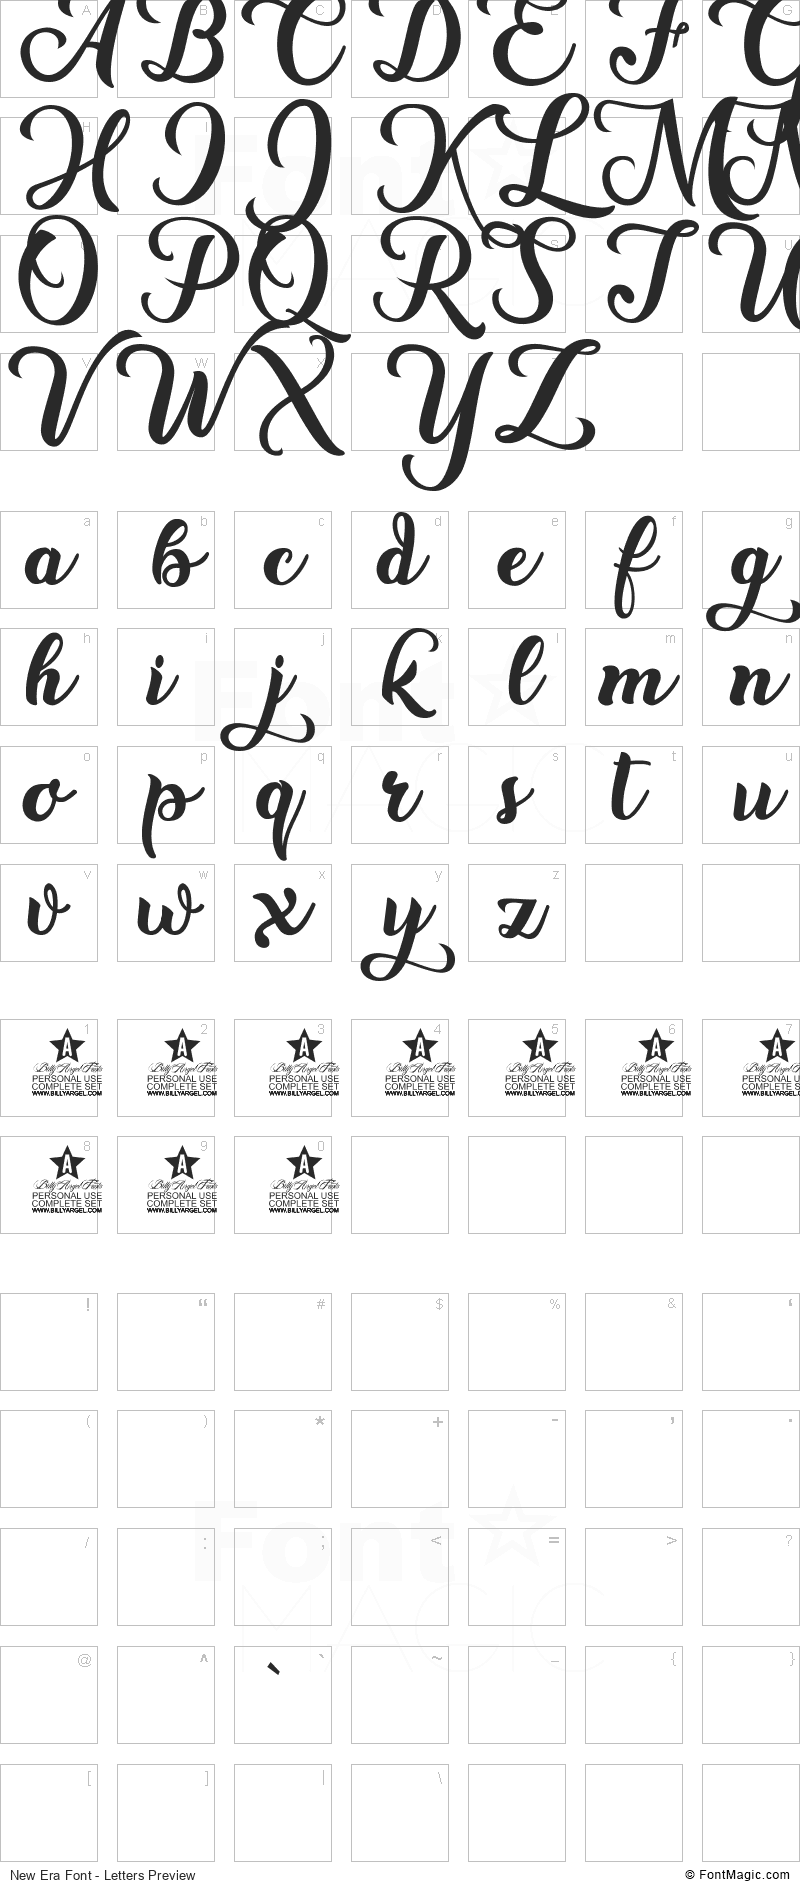 New Era Font - All Latters Preview Chart